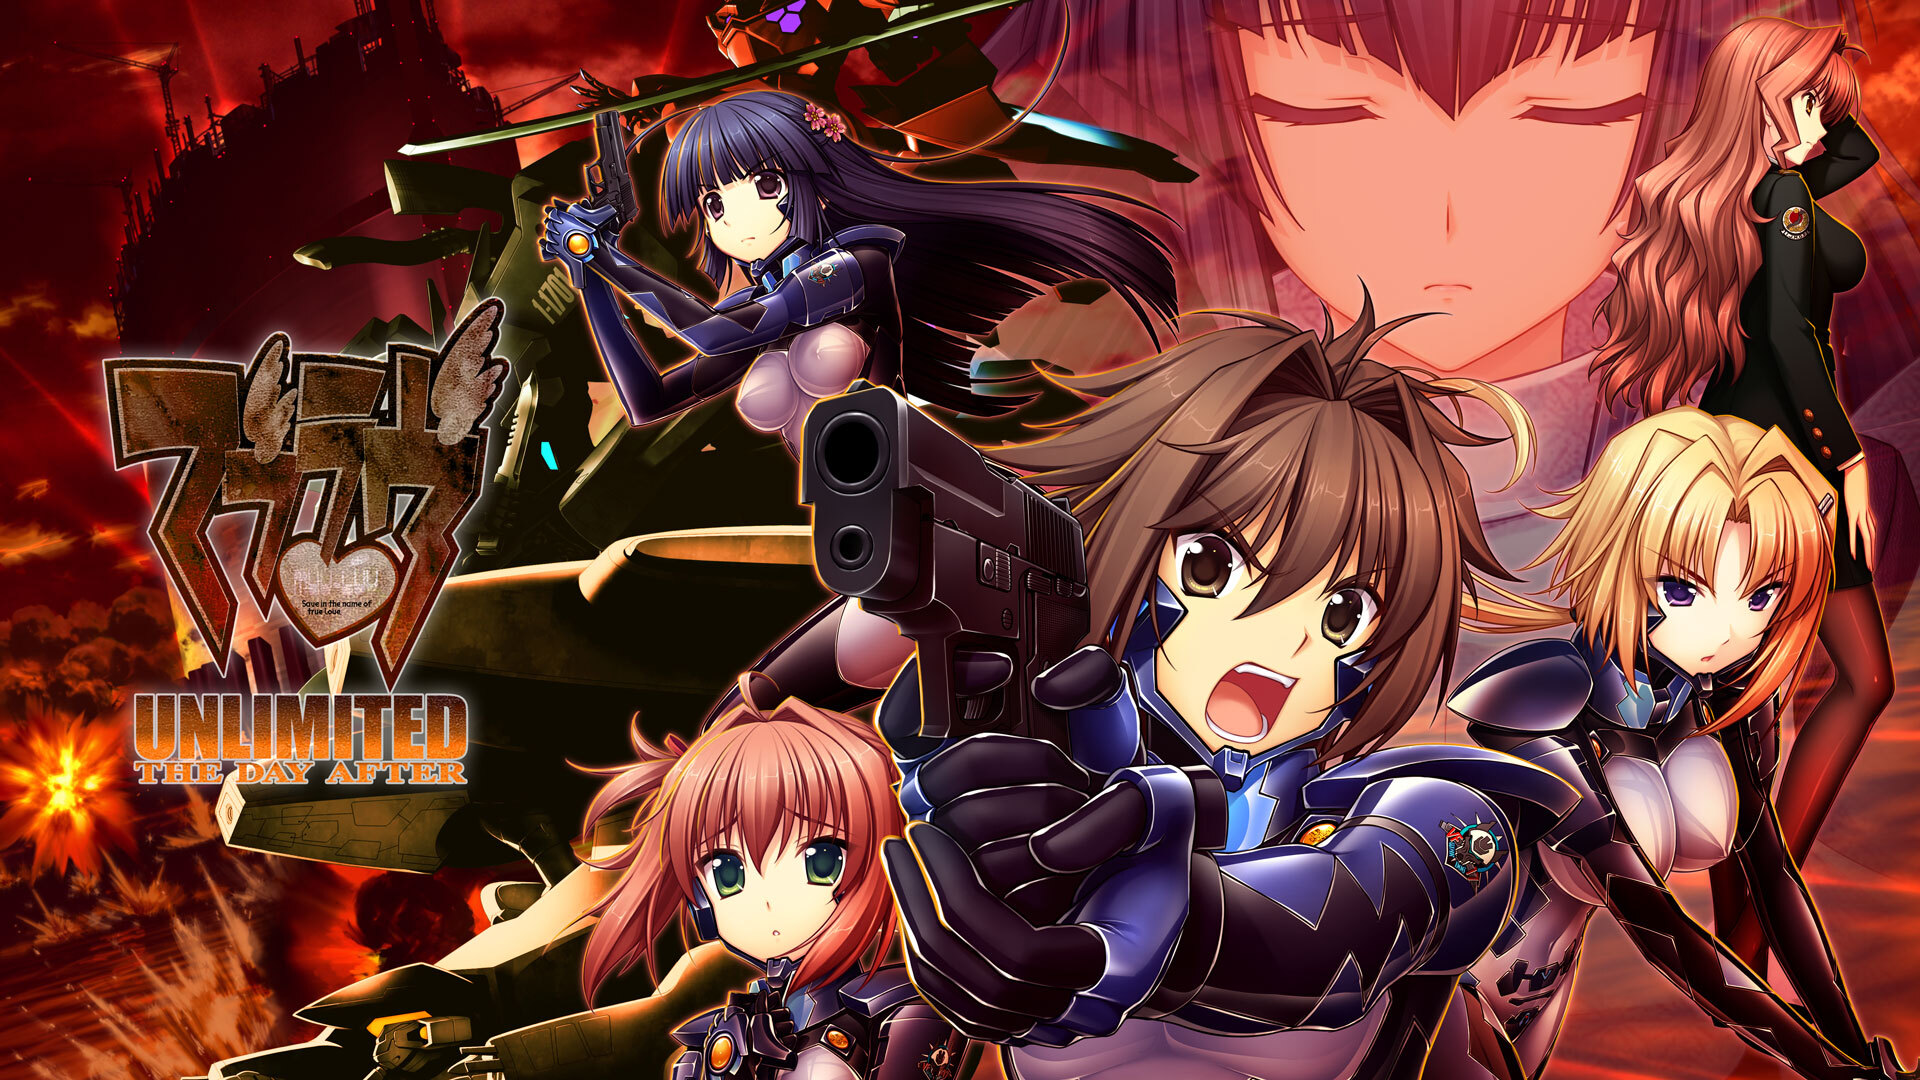 『MUV-LUV UNLIMITED THE DAY AFTER』episode:00～03　Steam版配信開始！